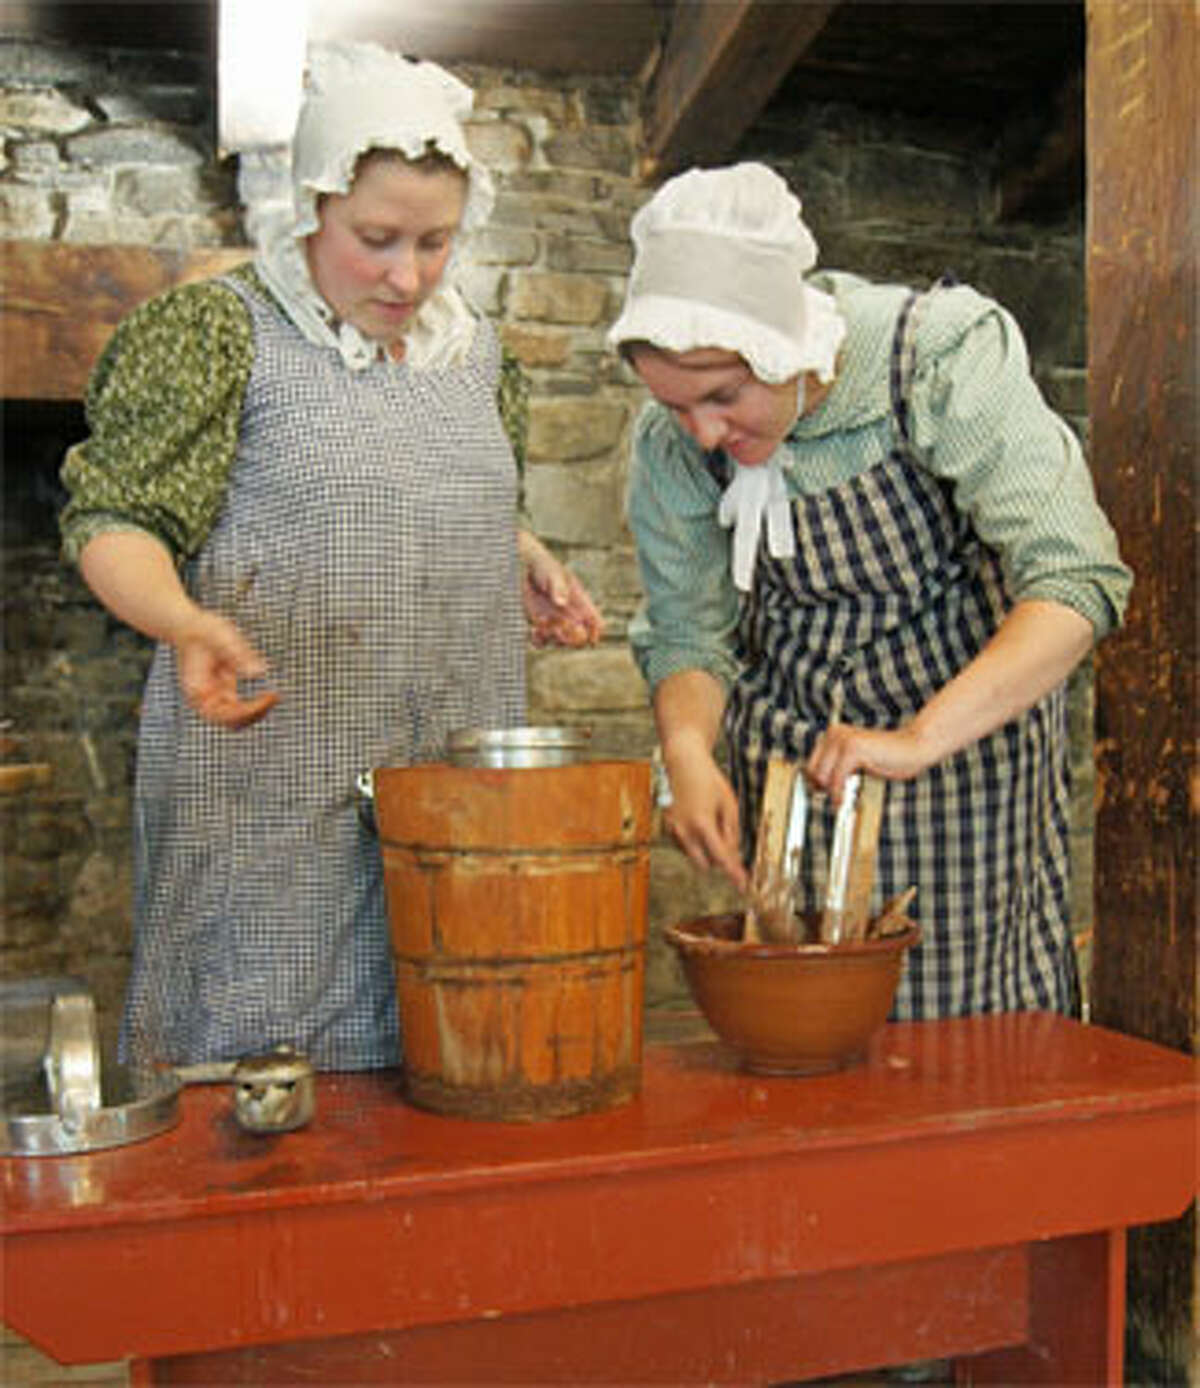 Women at Old Sturbridge Village making ice cream with the hand-cranking method, as was done in the 1830s.